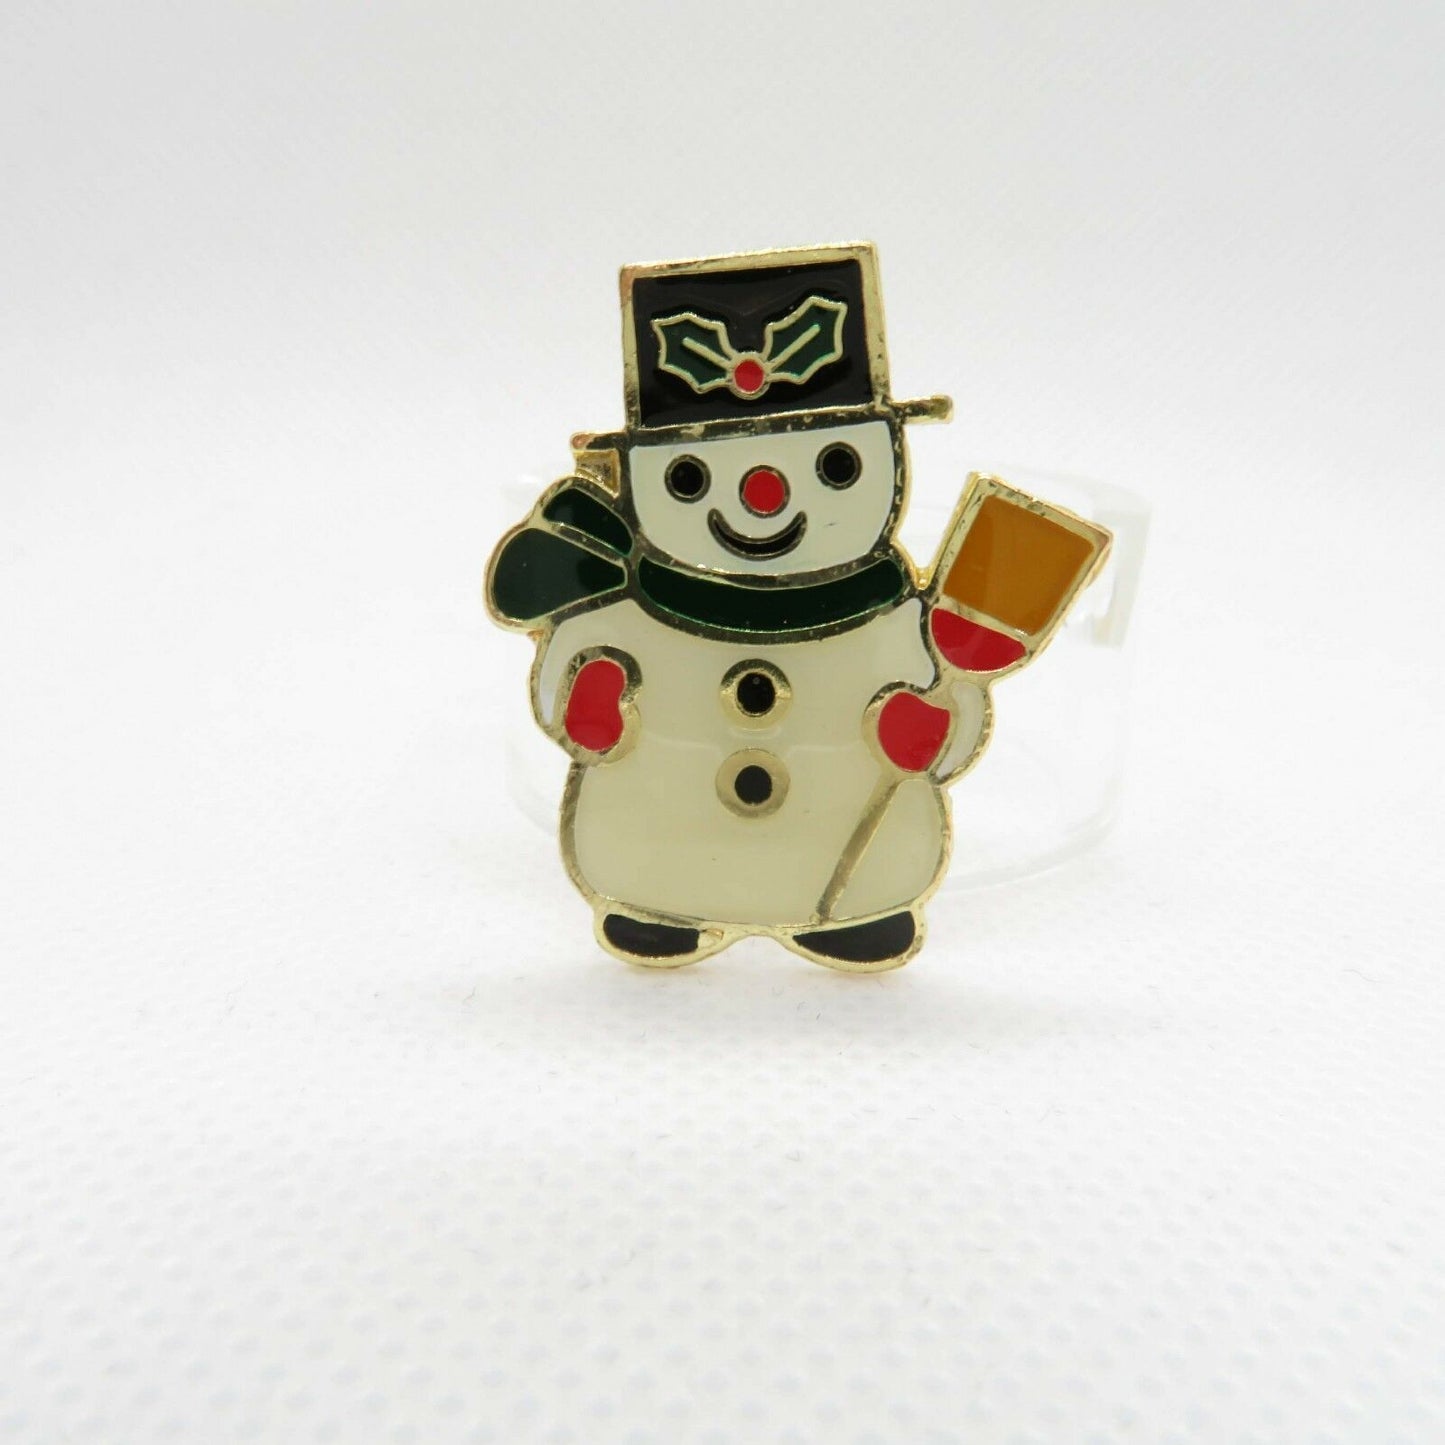 Vintage Snowman Pin Brooch Christmas Enameled Holly Winter Red Scarf Broom Jewelry - At Grandma's Table